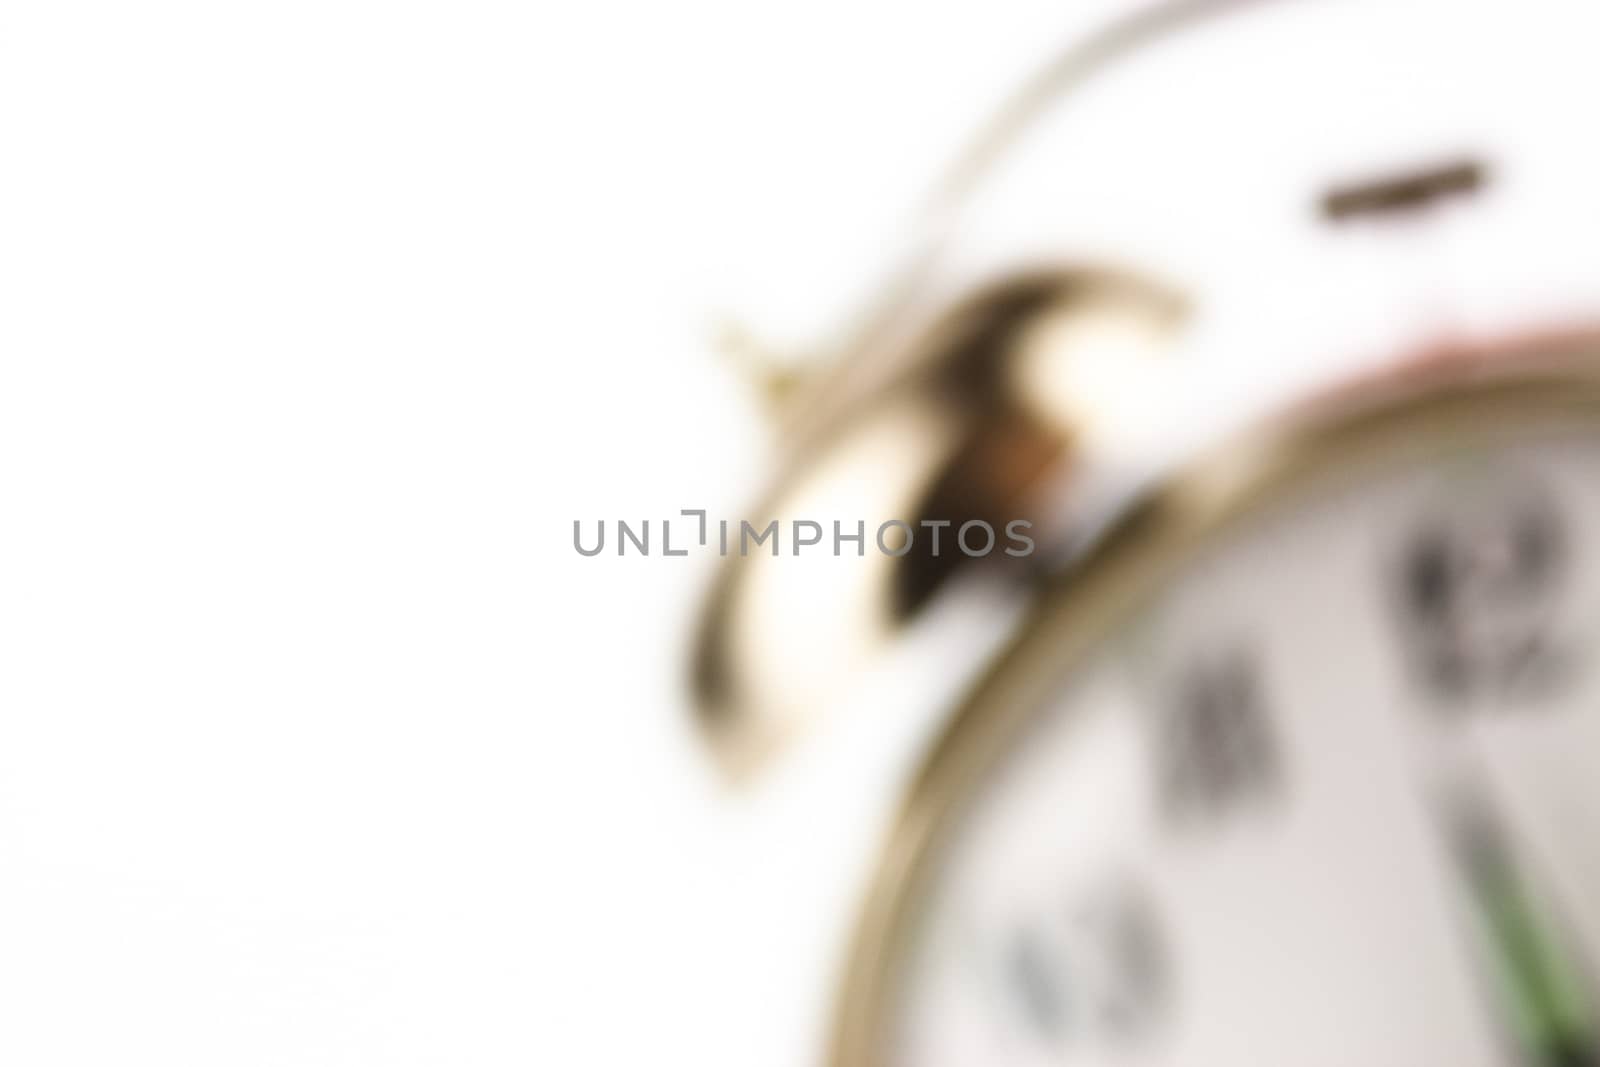 Close up of an alarm clock on a white background - blurred